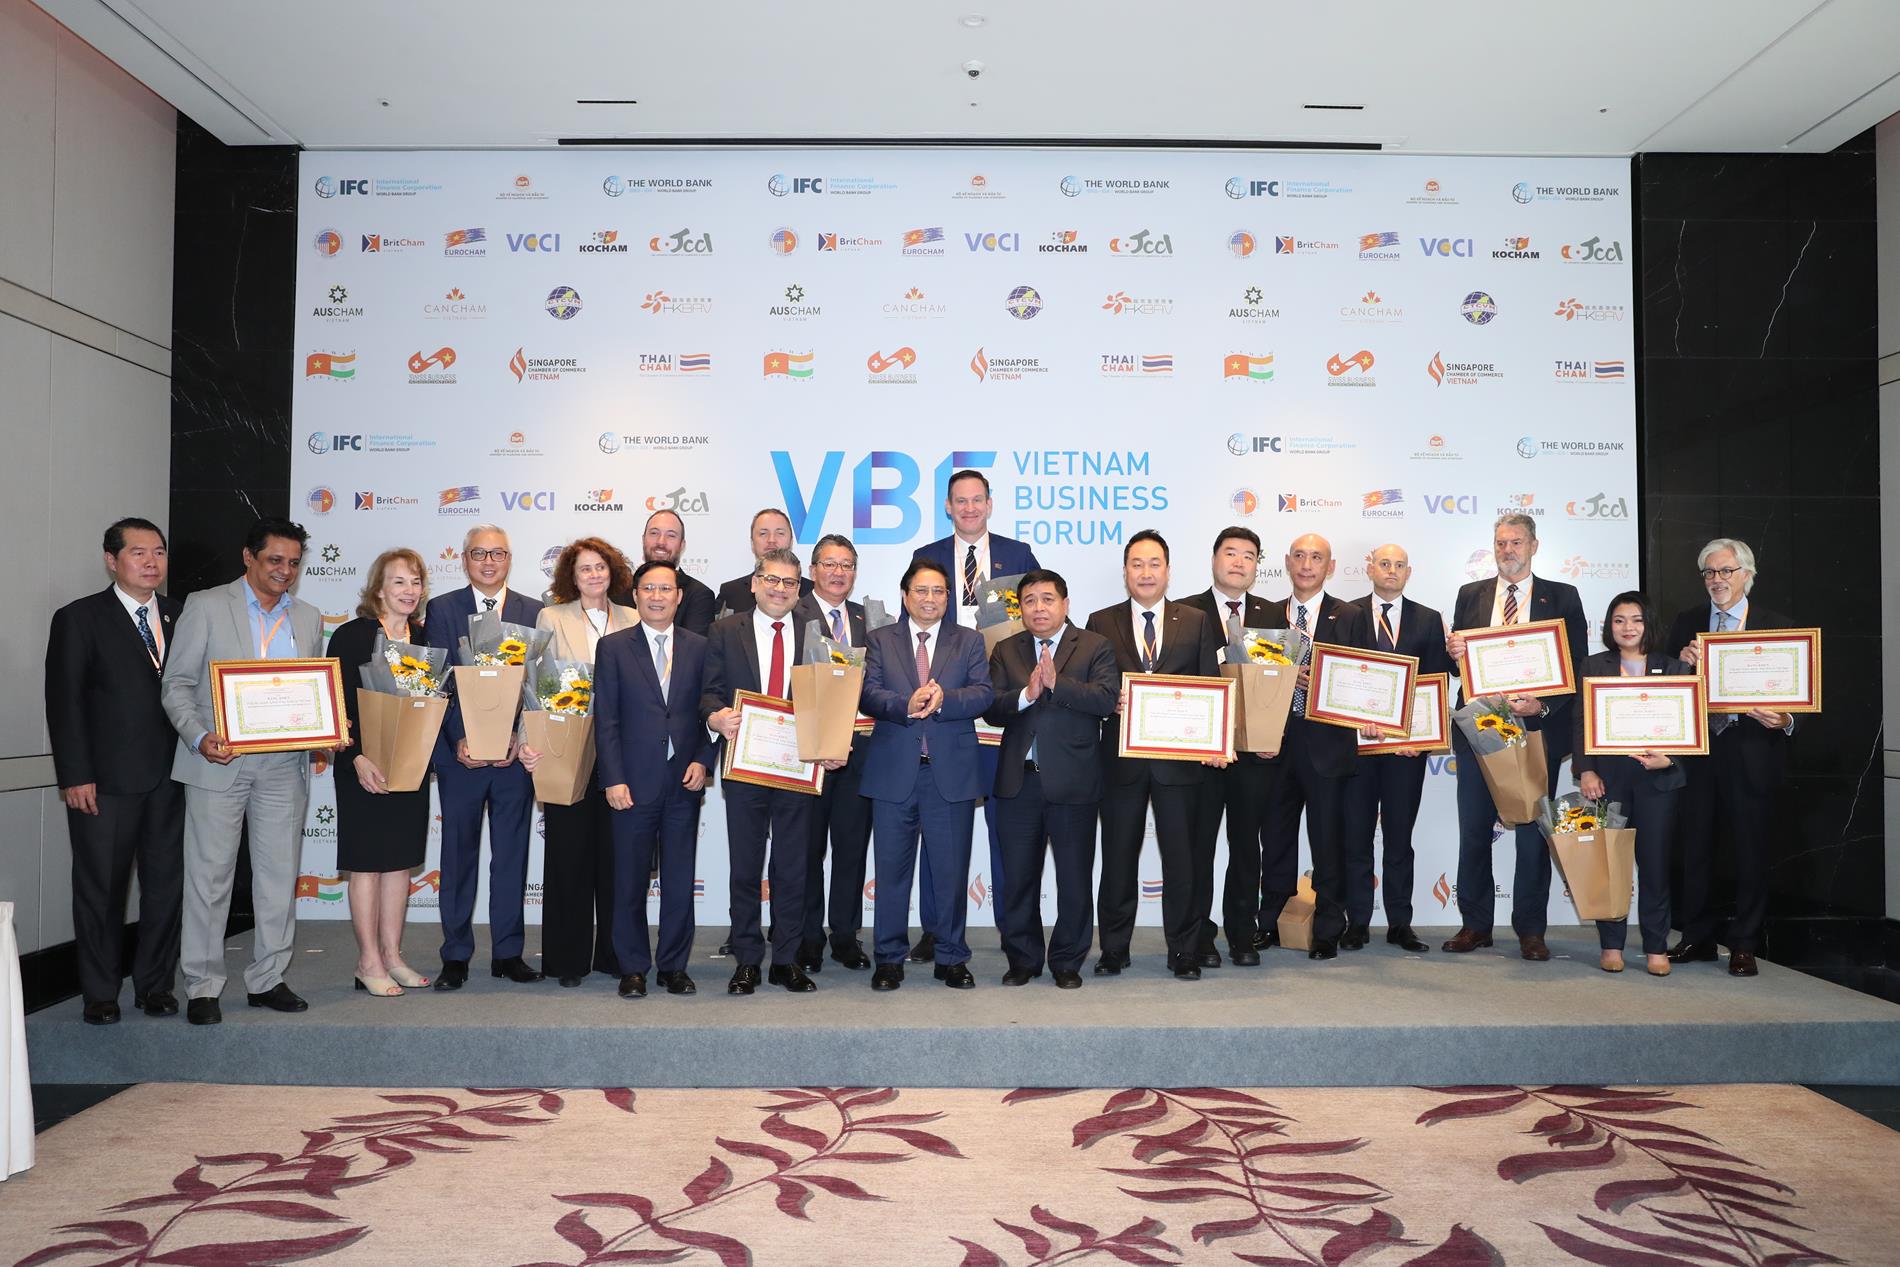 PM Pham Minh Chinh & Minister Nguyen Chi Dung awarded Certificates of Merit from the Ministry of Planning and Investment to outstanding business chambers. 